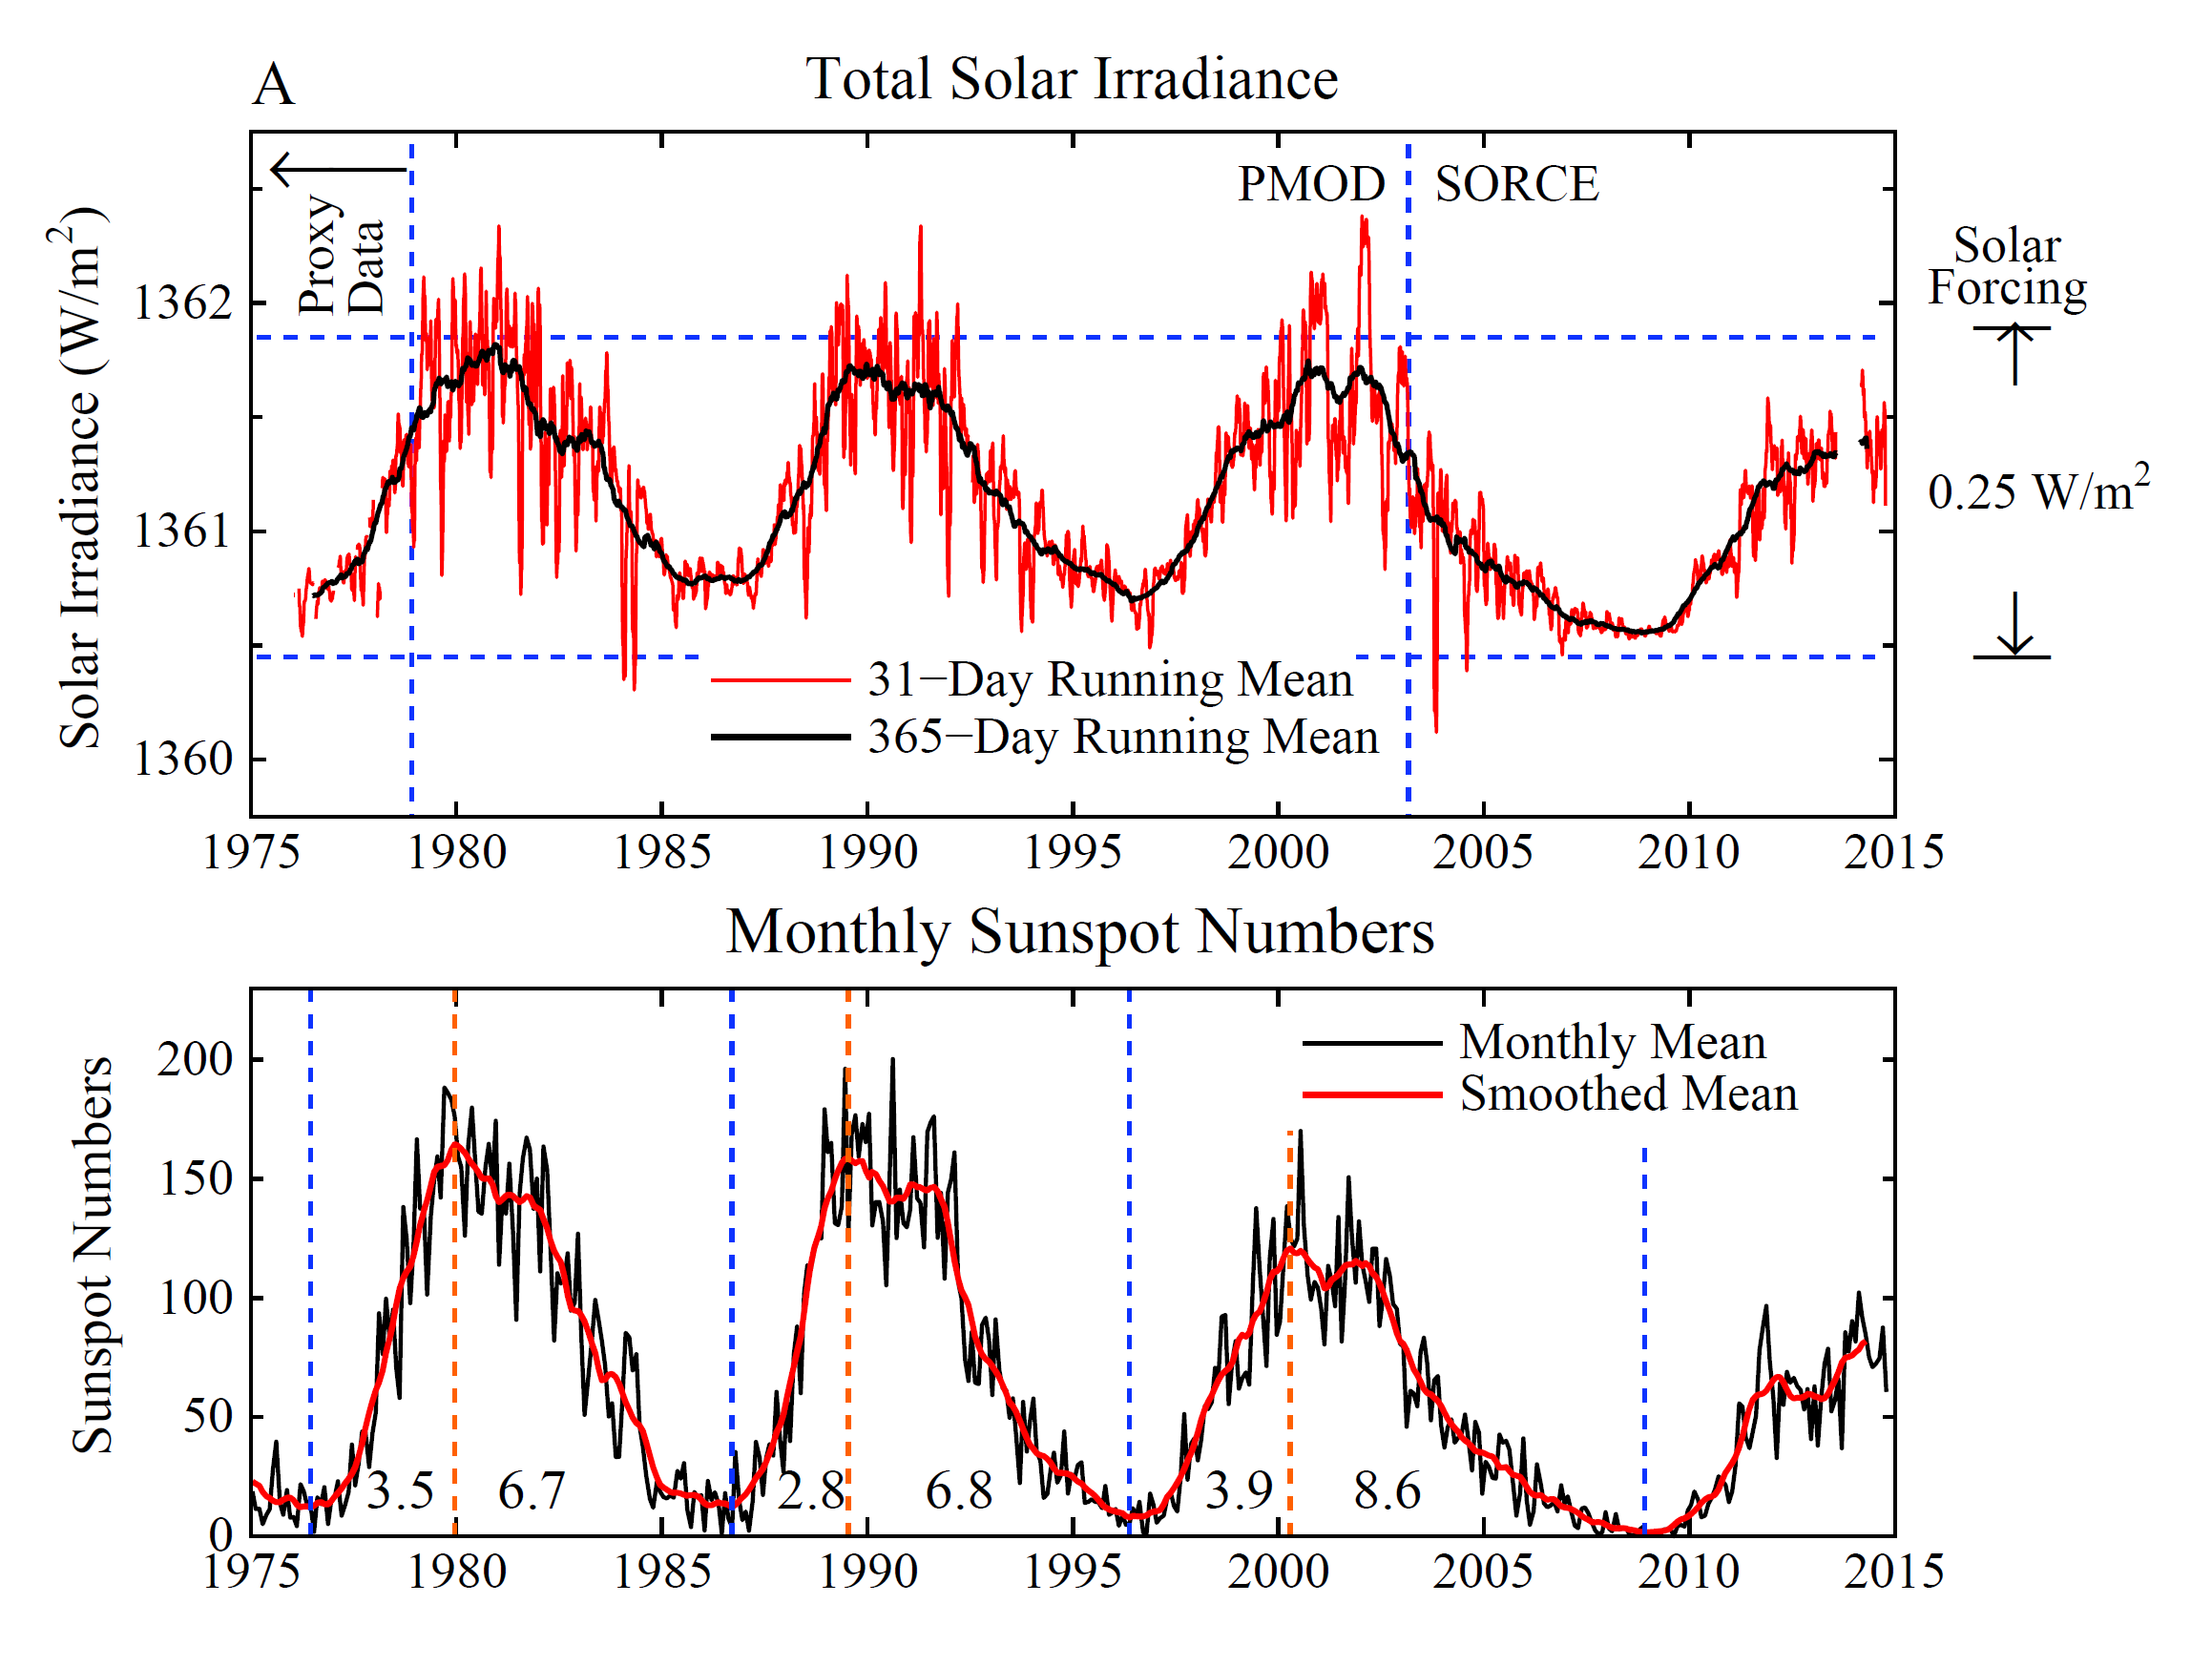 Changes_in_total_solar_irradiance_and_monthly_sunspot_numbers%2C_1975-2013.png